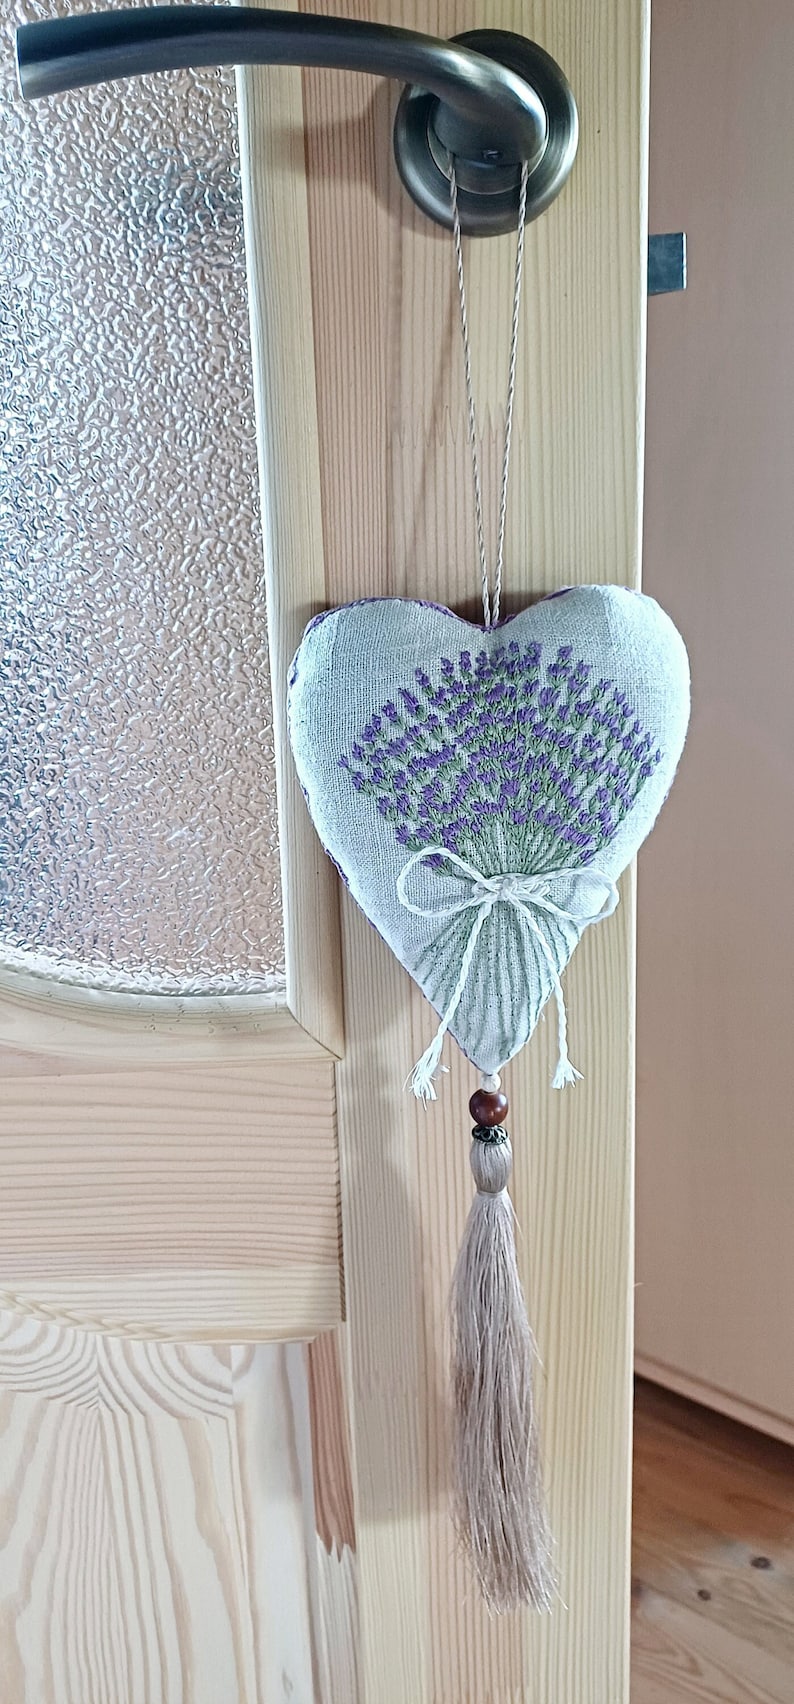 Handmade hand embroidered heart shaped linen sachet with hanging loop and tassel filled with lavender. Hung on door hanger. Embroidered lavenders.